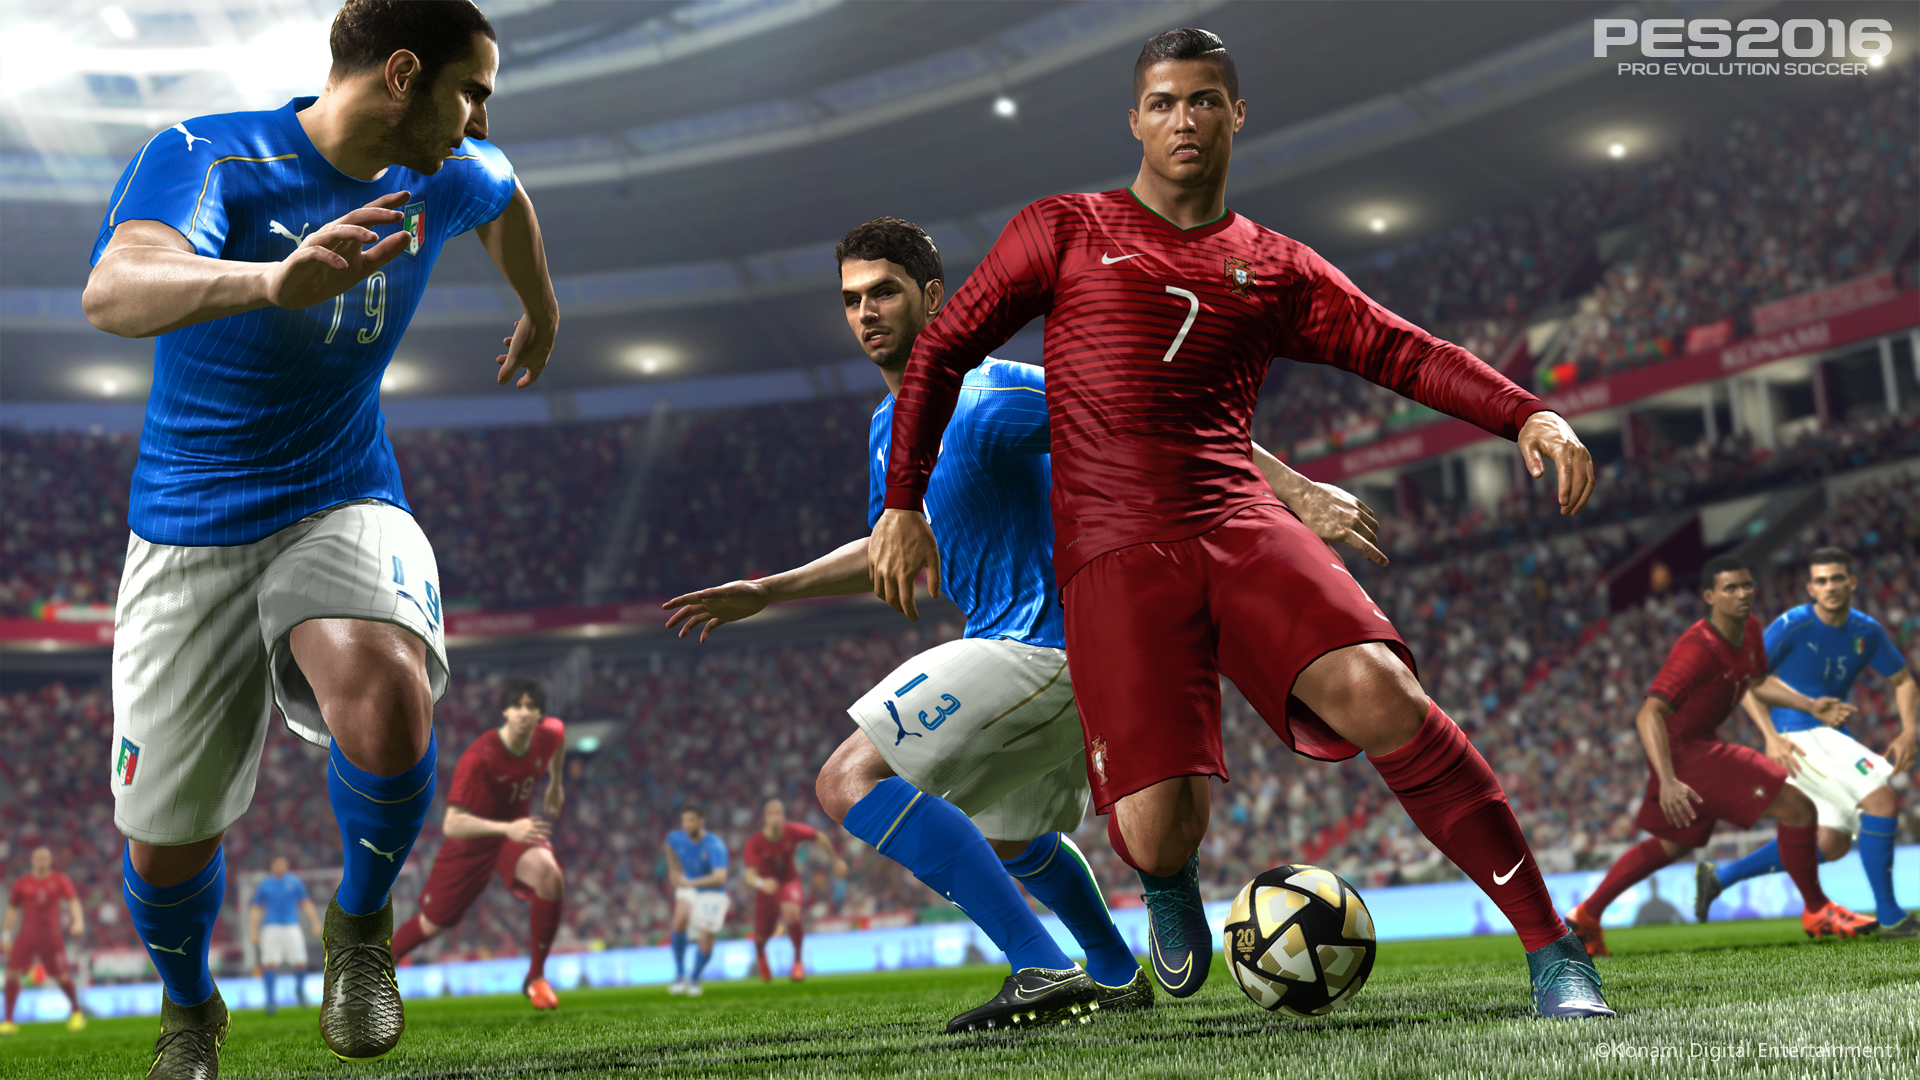 How to install PES 2016 option files on PS4